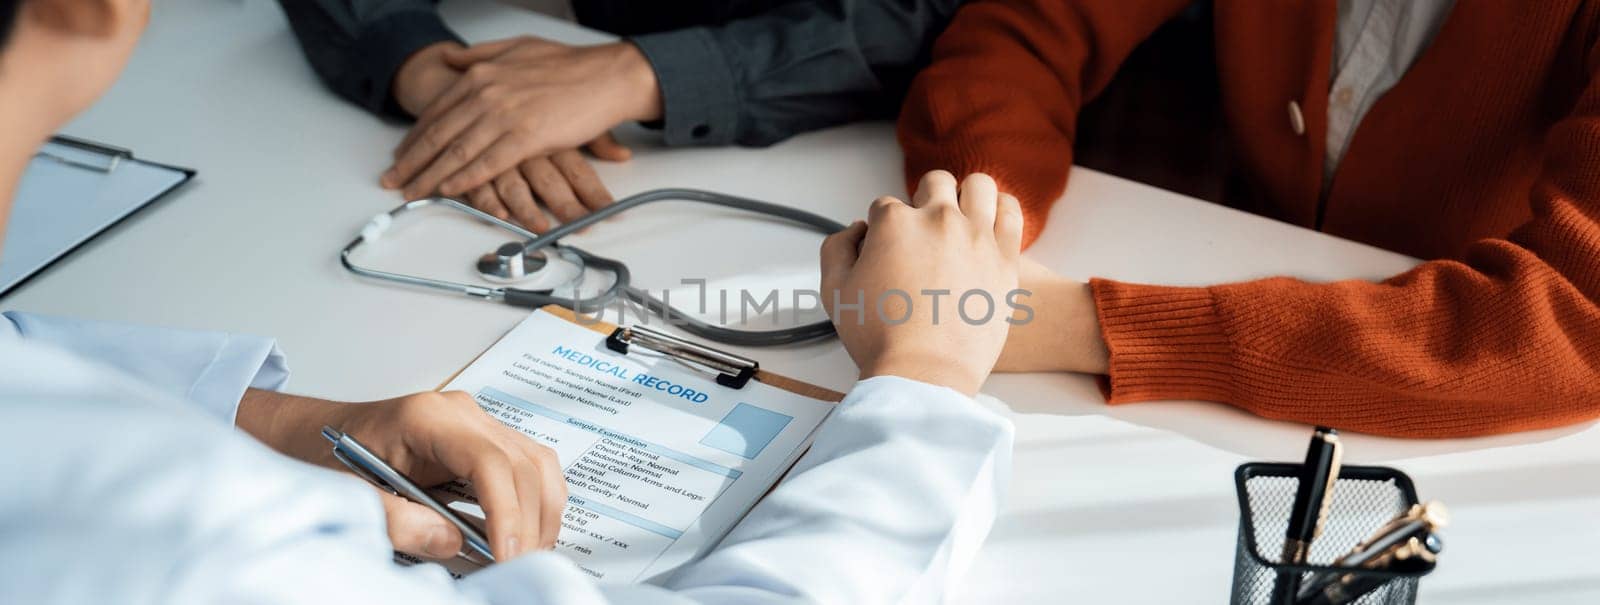 Couple attend fertility or medical consultation with gynecologist at hospital as family planning care for pregnancy while doctor and husband consoling young wife through appointment. Panorama Rigid